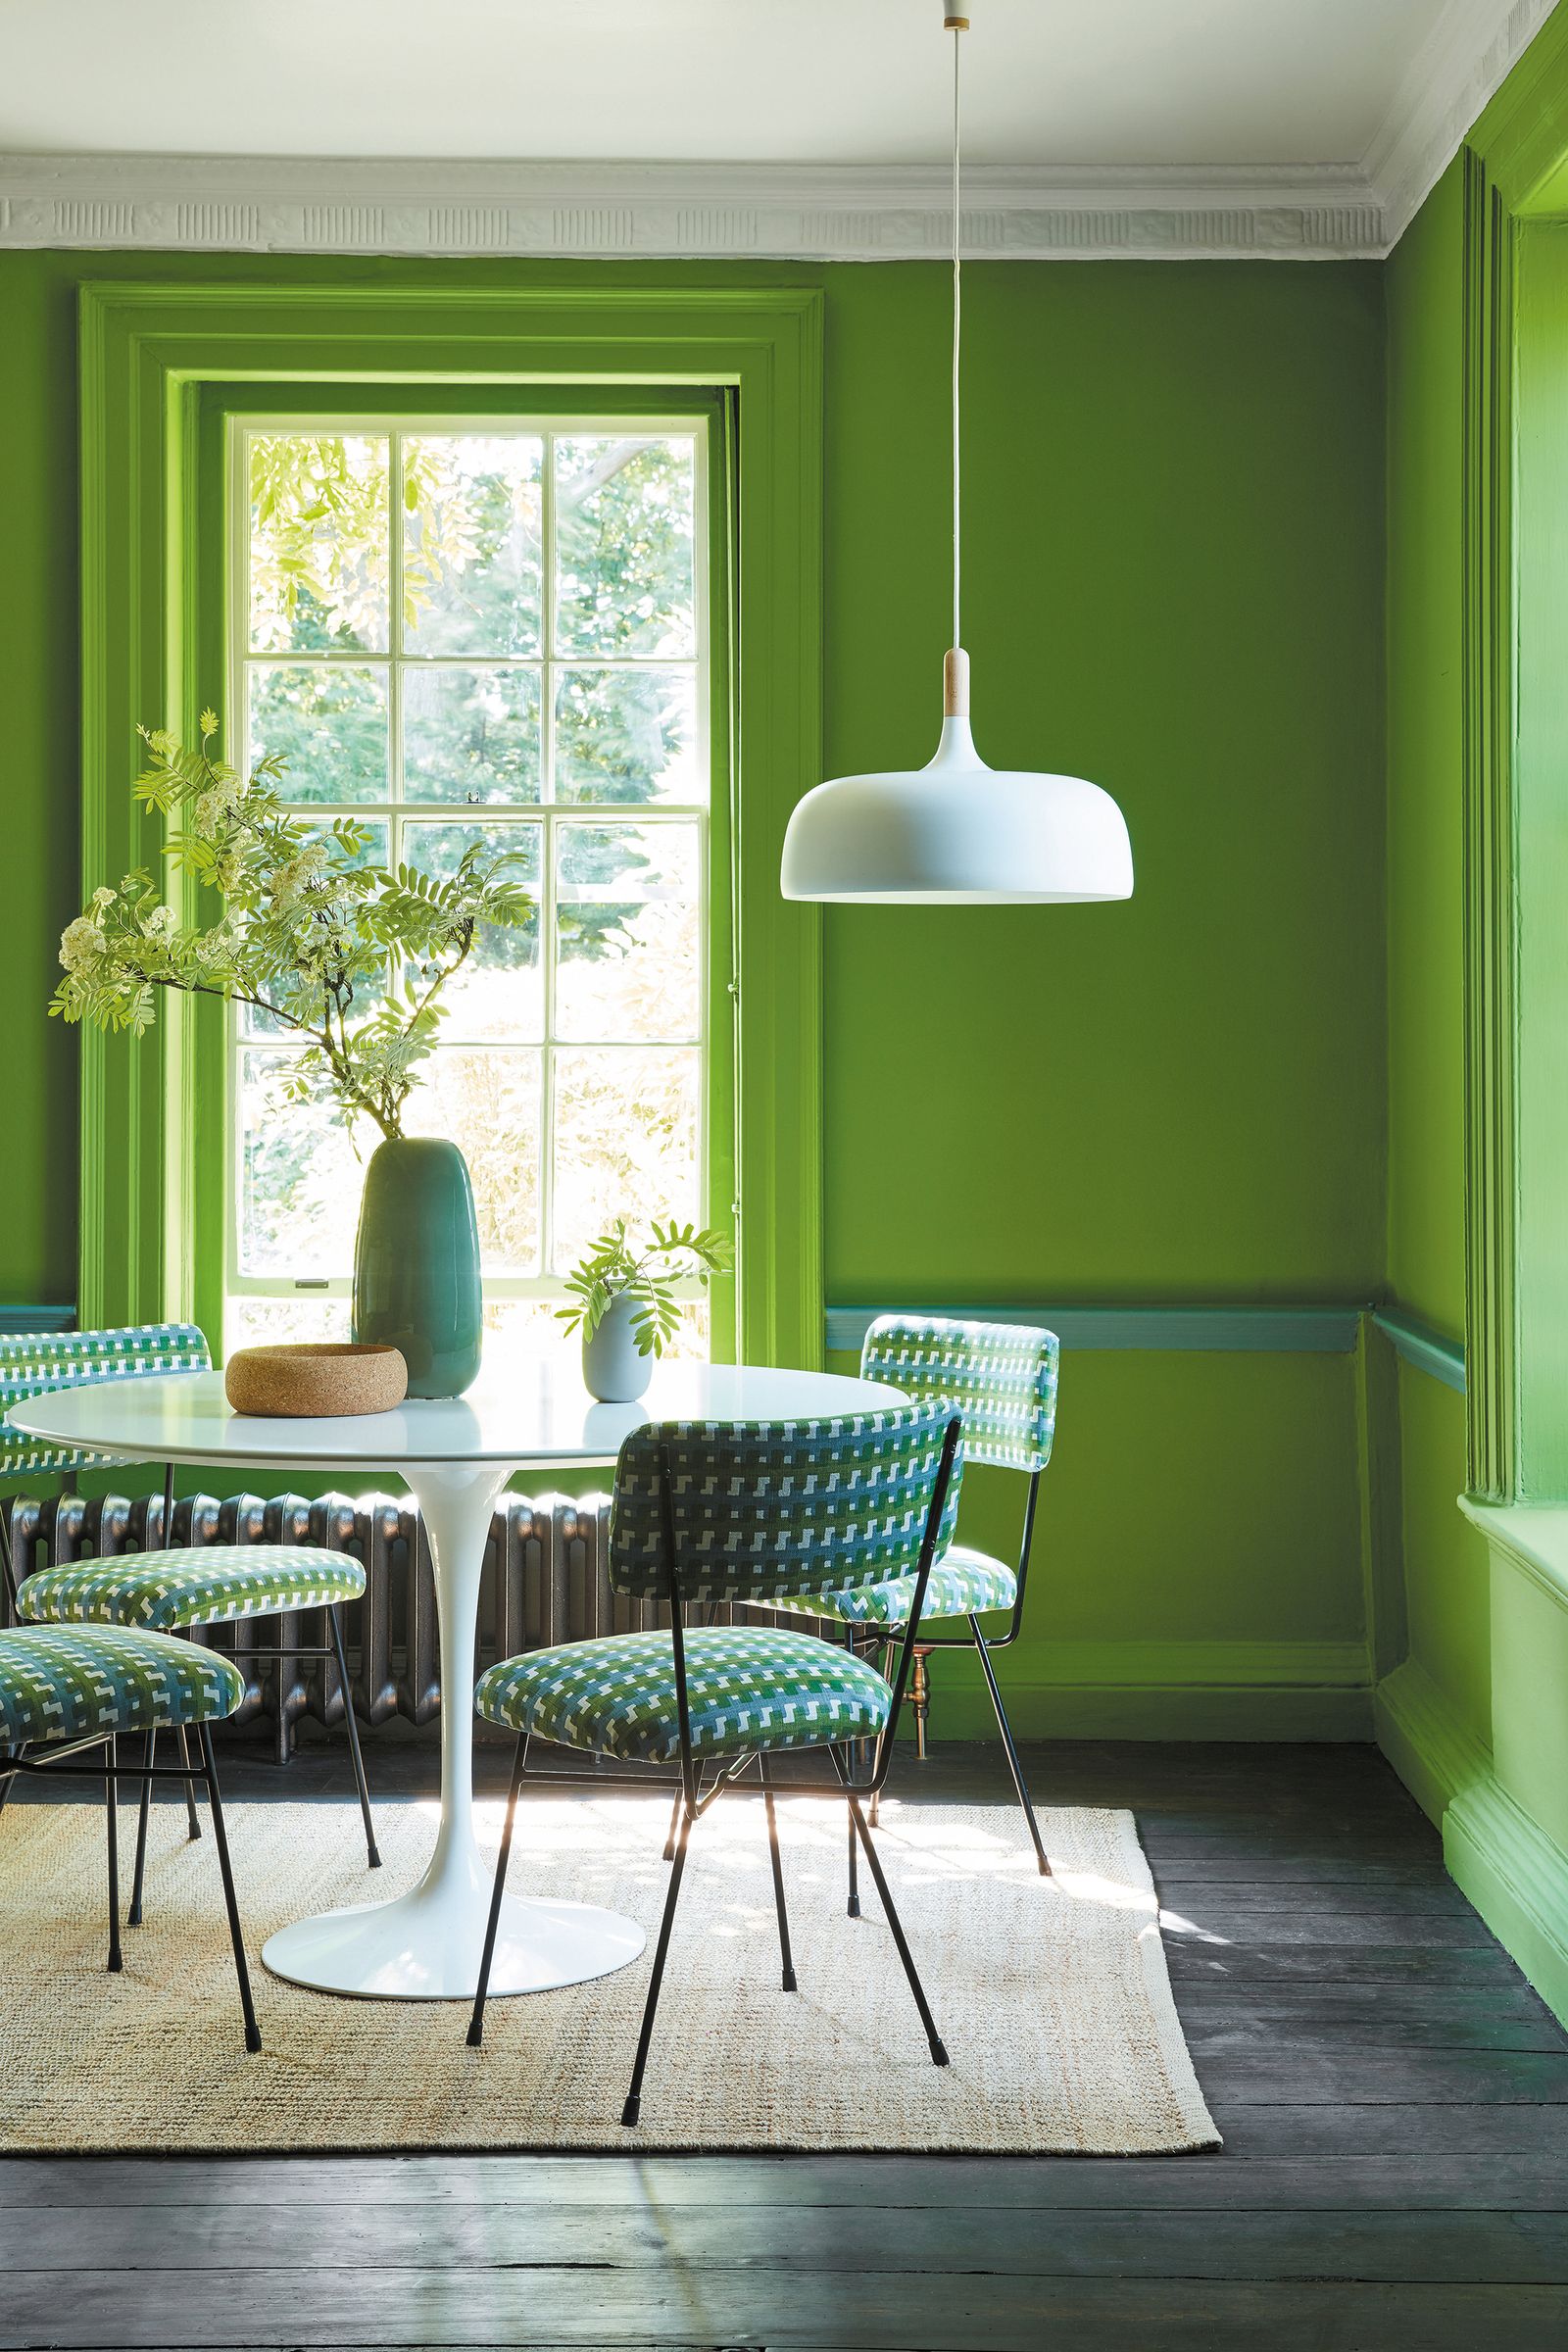 Dining room color ideas: 16 paint inspiration shades